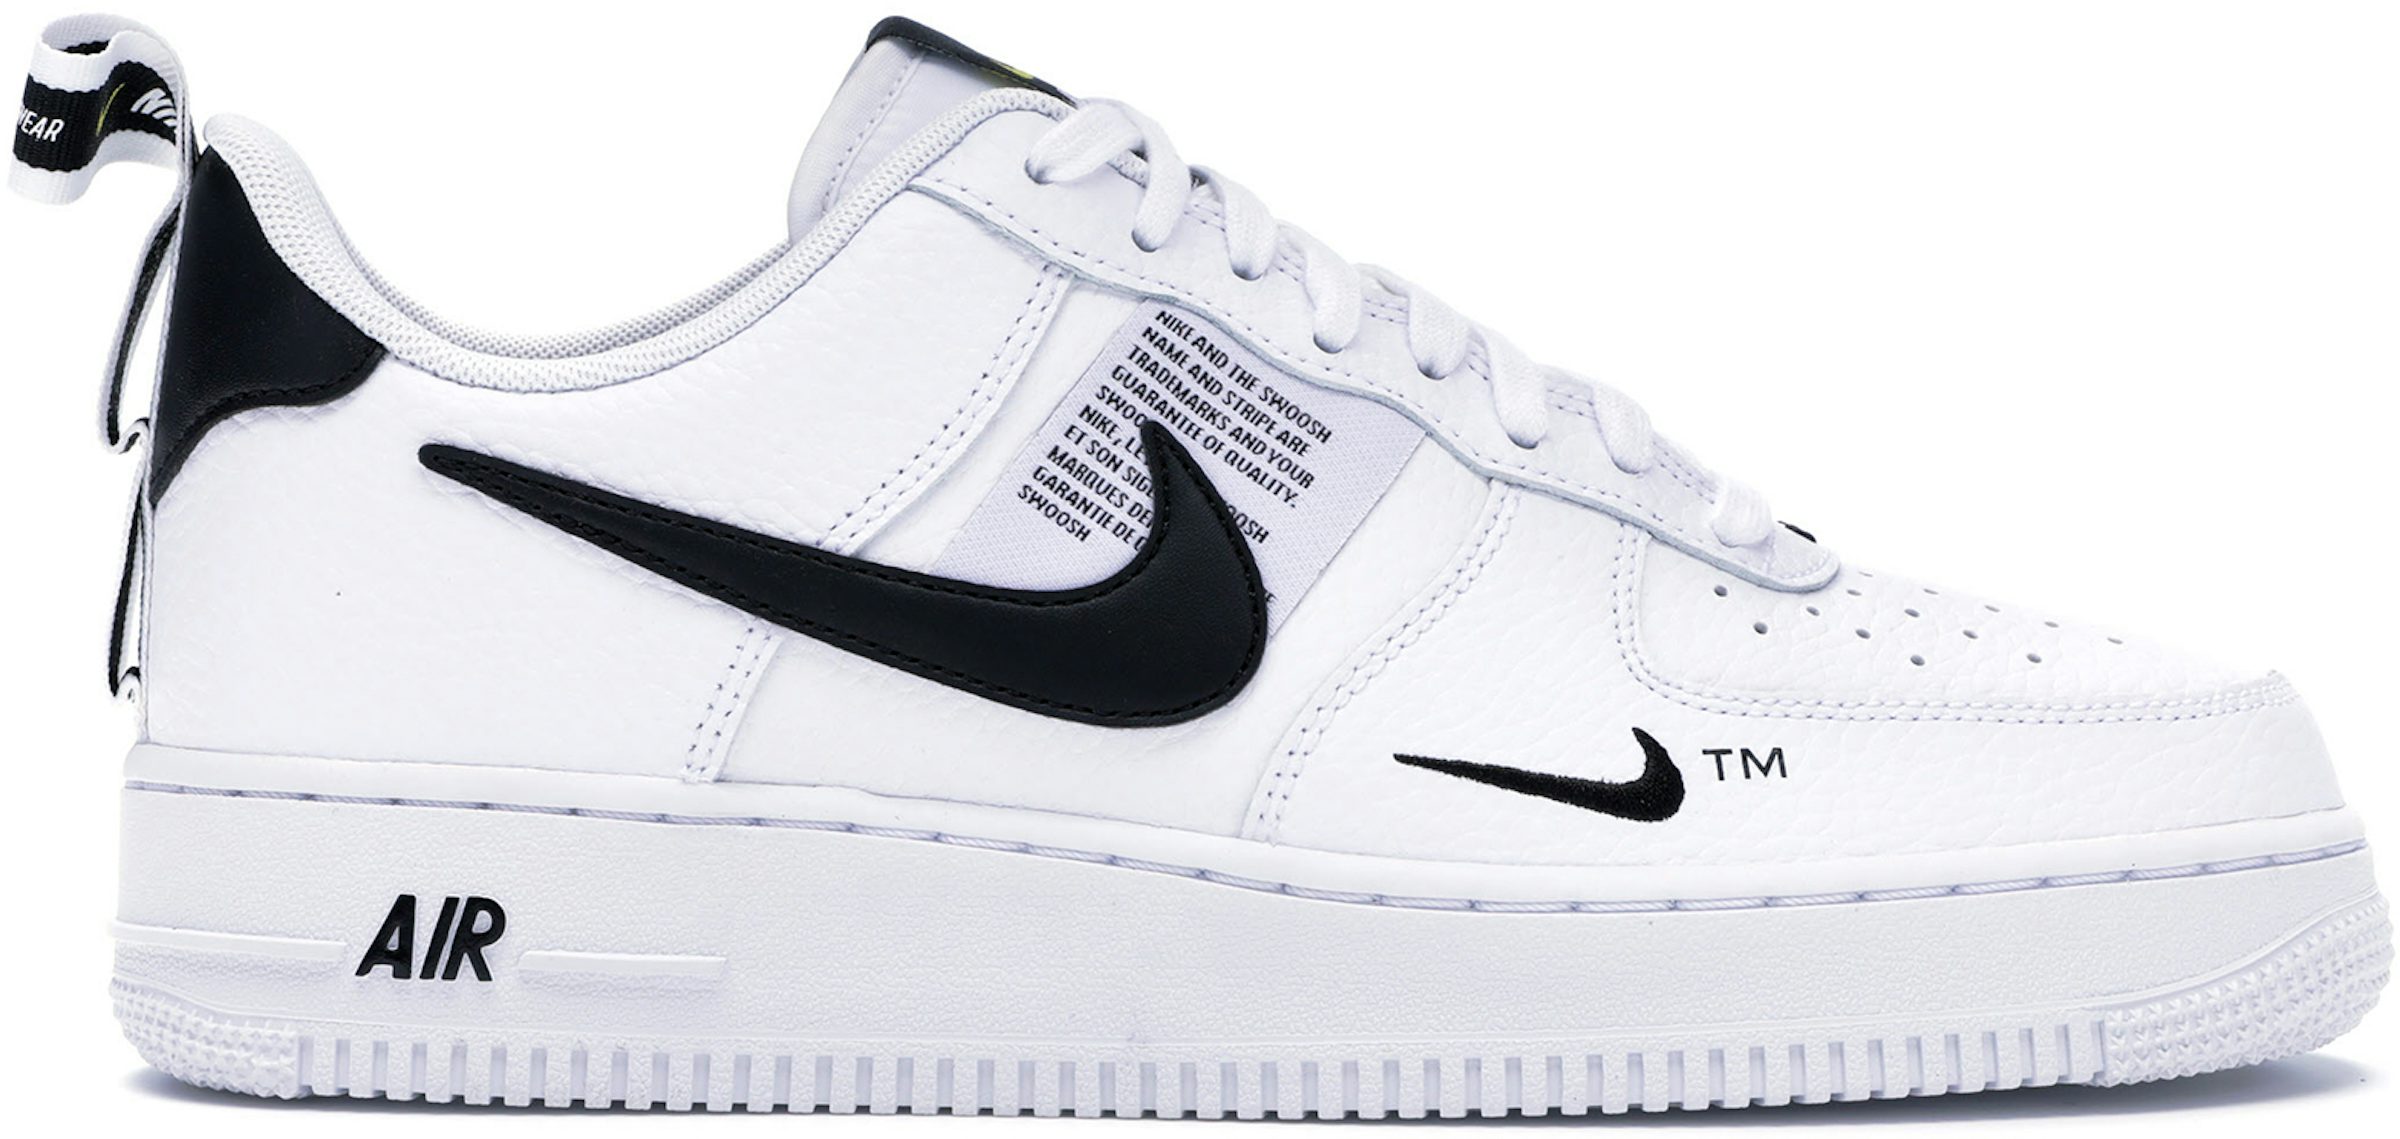 Nike Air Force One 08 LV8 Utility White and Black